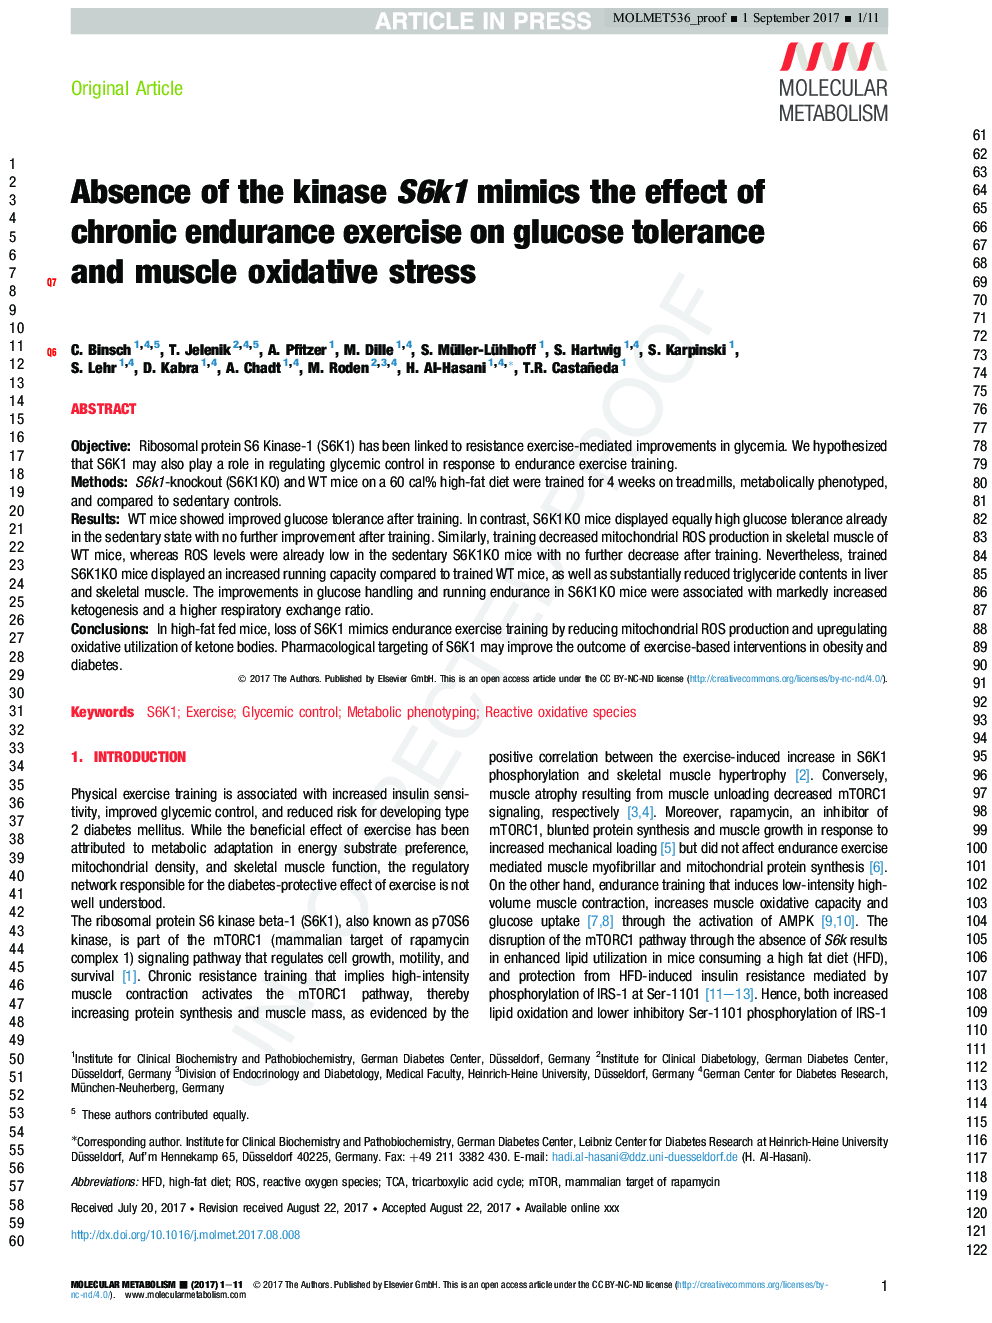 Absence of the kinase S6k1 mimics the effect of chronic endurance exercise on glucose tolerance and muscle oxidative stress